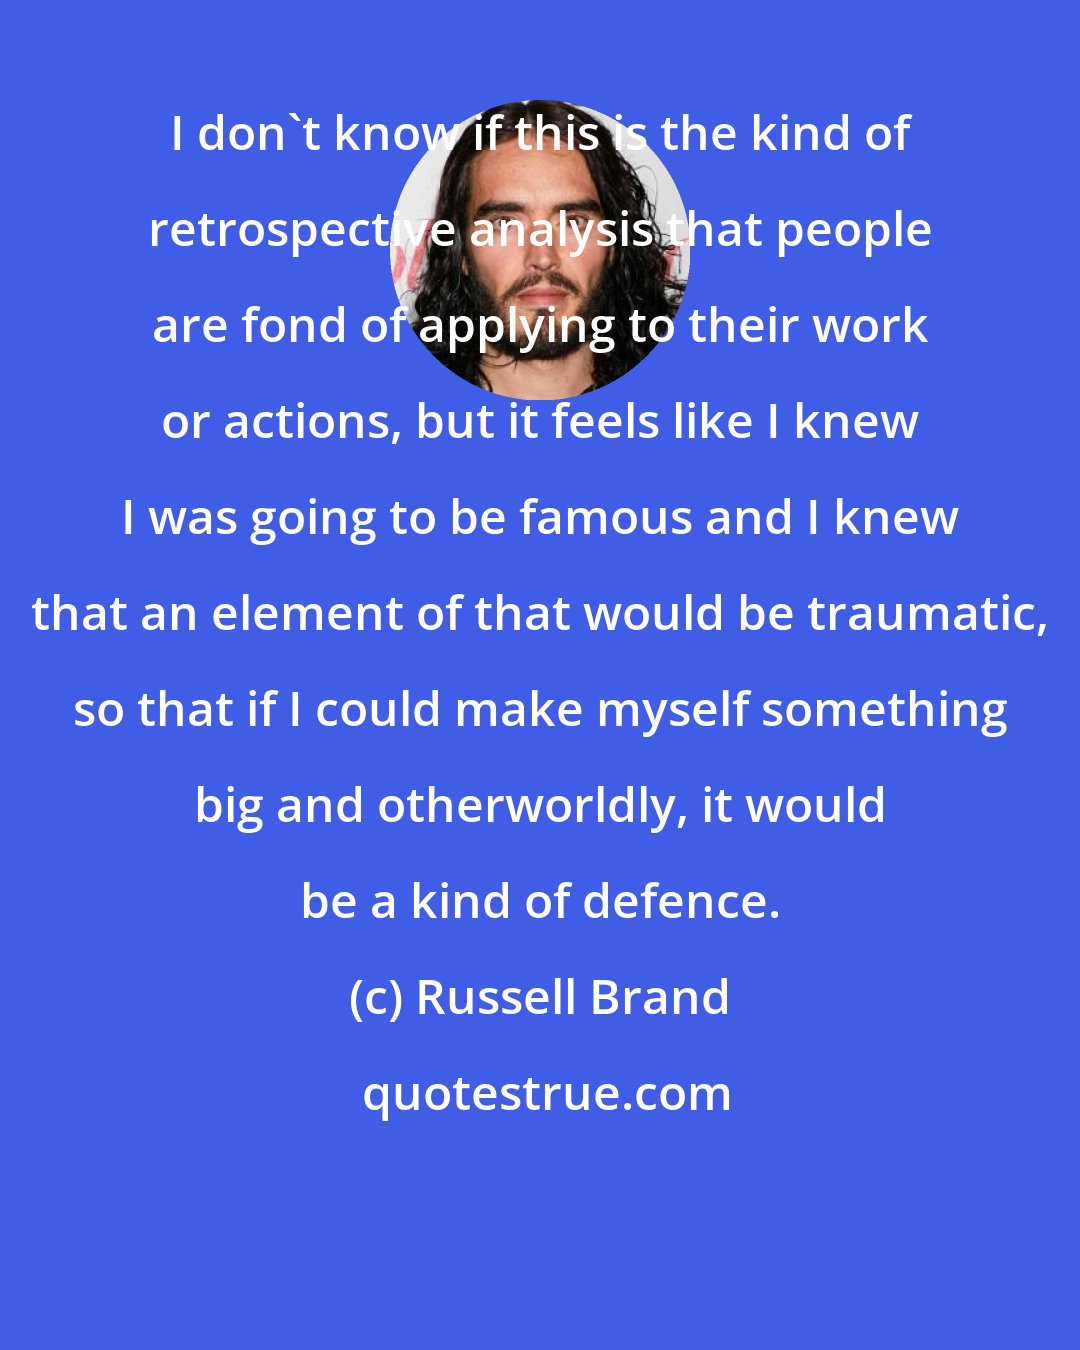 Russell Brand: I don't know if this is the kind of retrospective analysis that people are fond of applying to their work or actions, but it feels like I knew I was going to be famous and I knew that an element of that would be traumatic, so that if I could make myself something big and otherworldly, it would be a kind of defence.